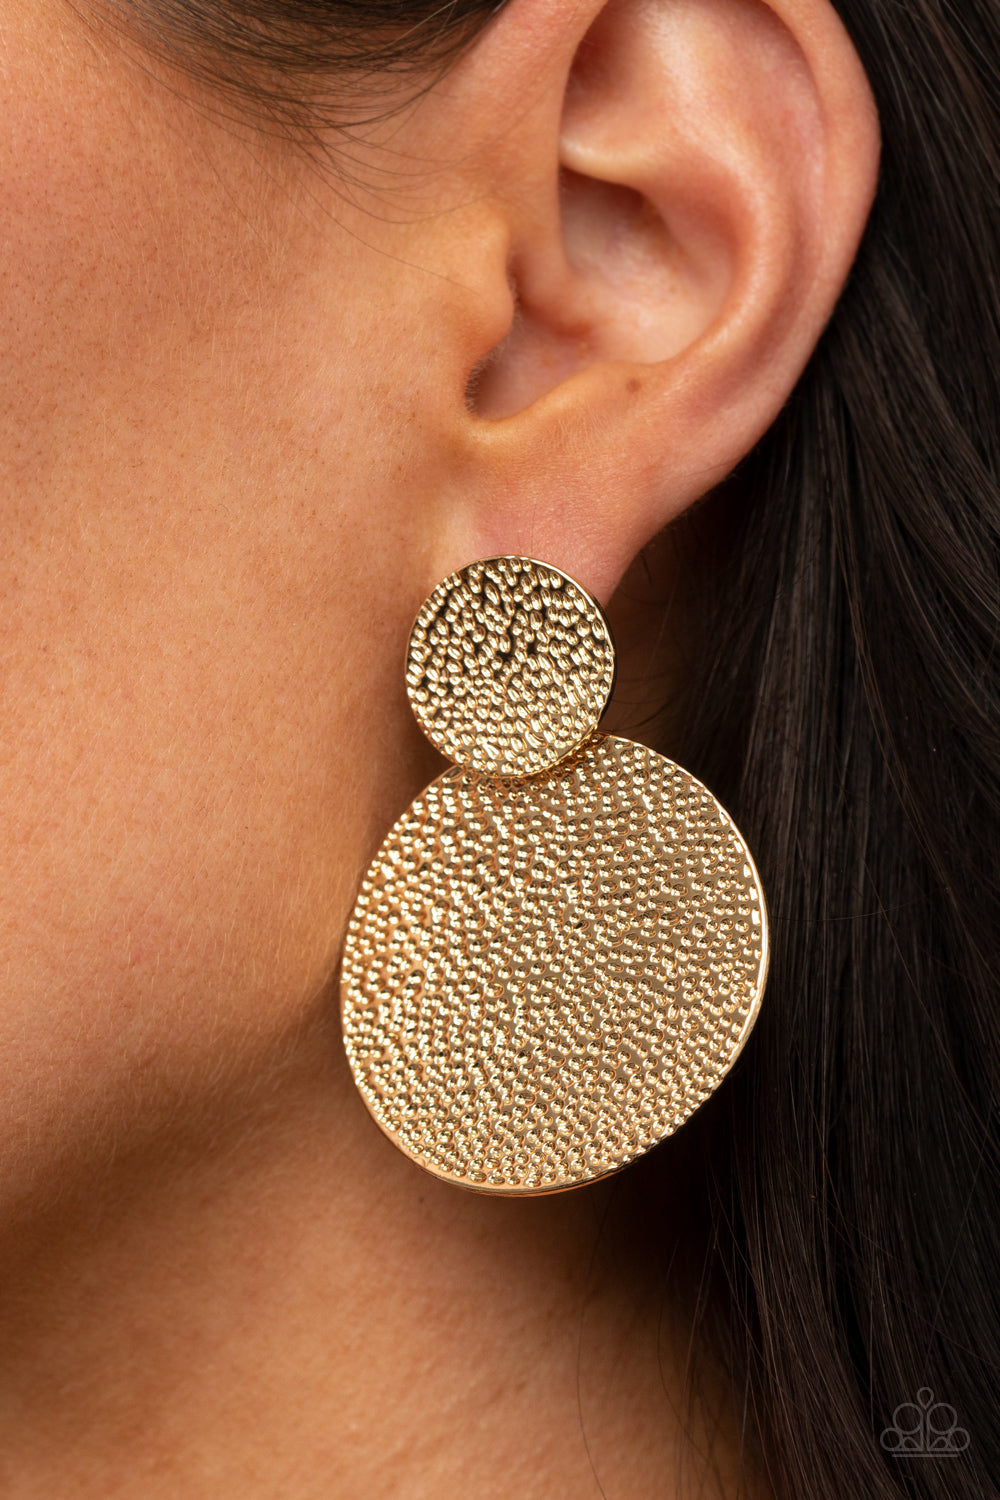 Paparazzi Accessories Refined Relic Gold Discs Earrings